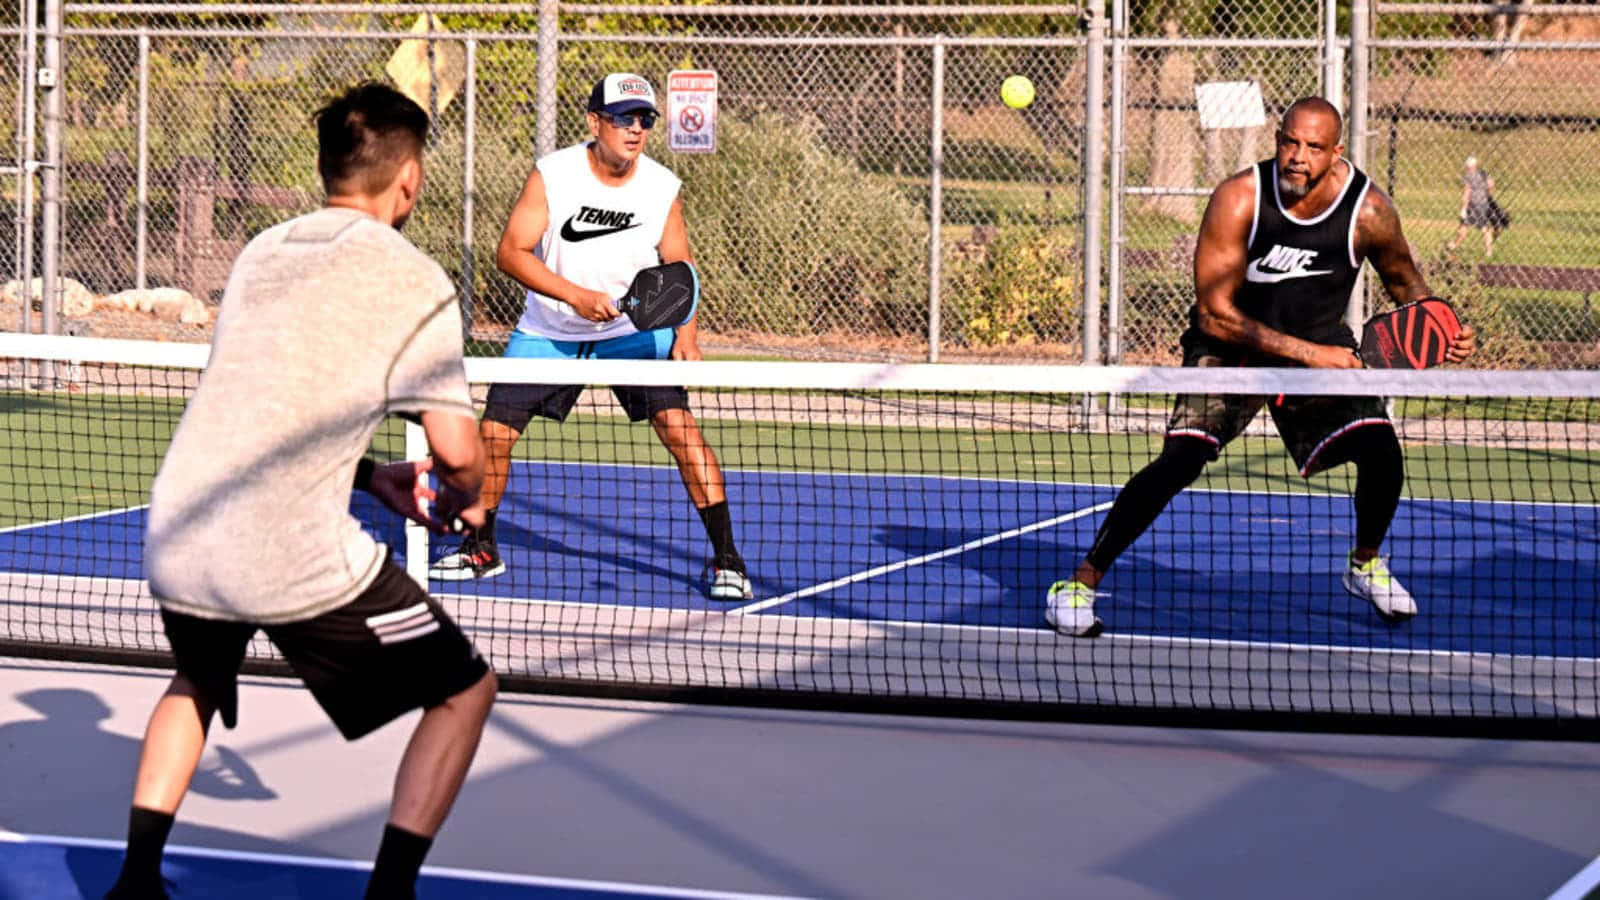 Get Ready for Action-Packed Pickleball Matches